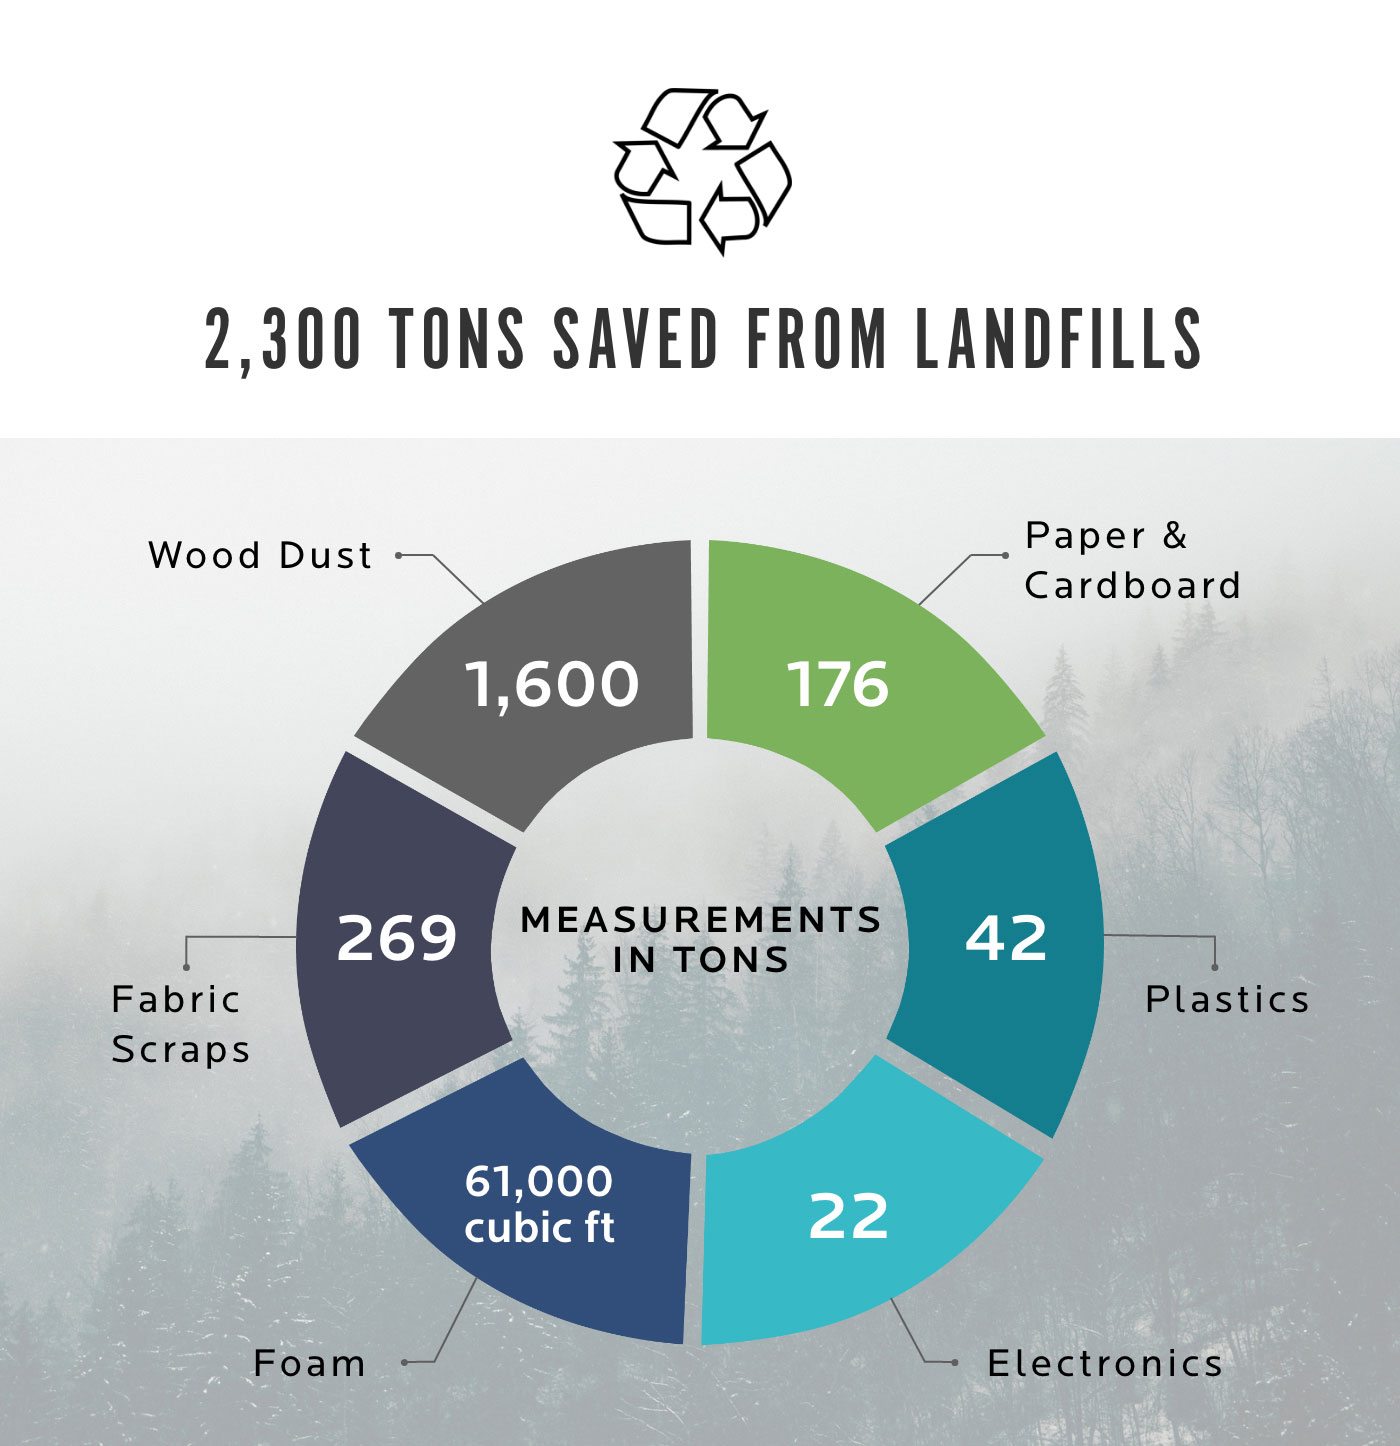 2,300 Tons Saved from Landfills